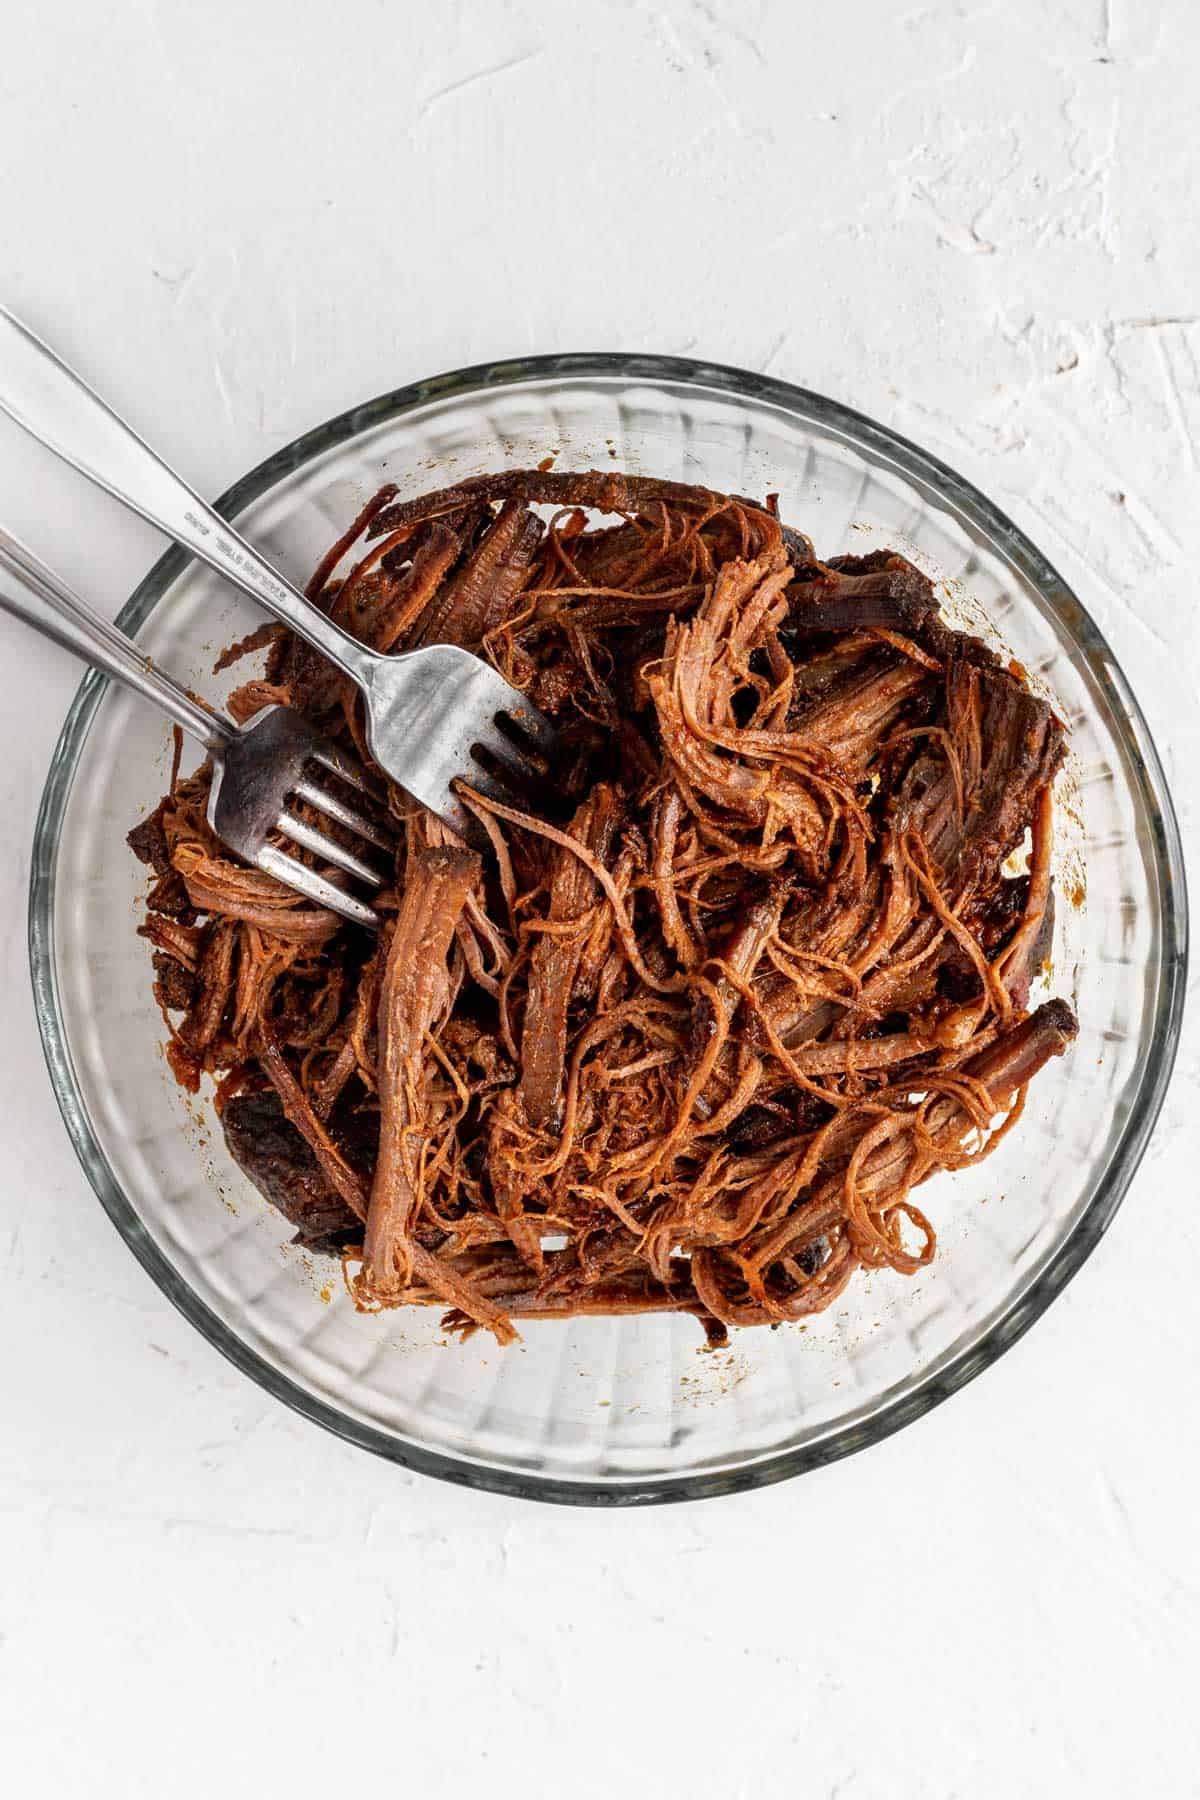 Brisket shredded in a glass bowl with 2 forks.